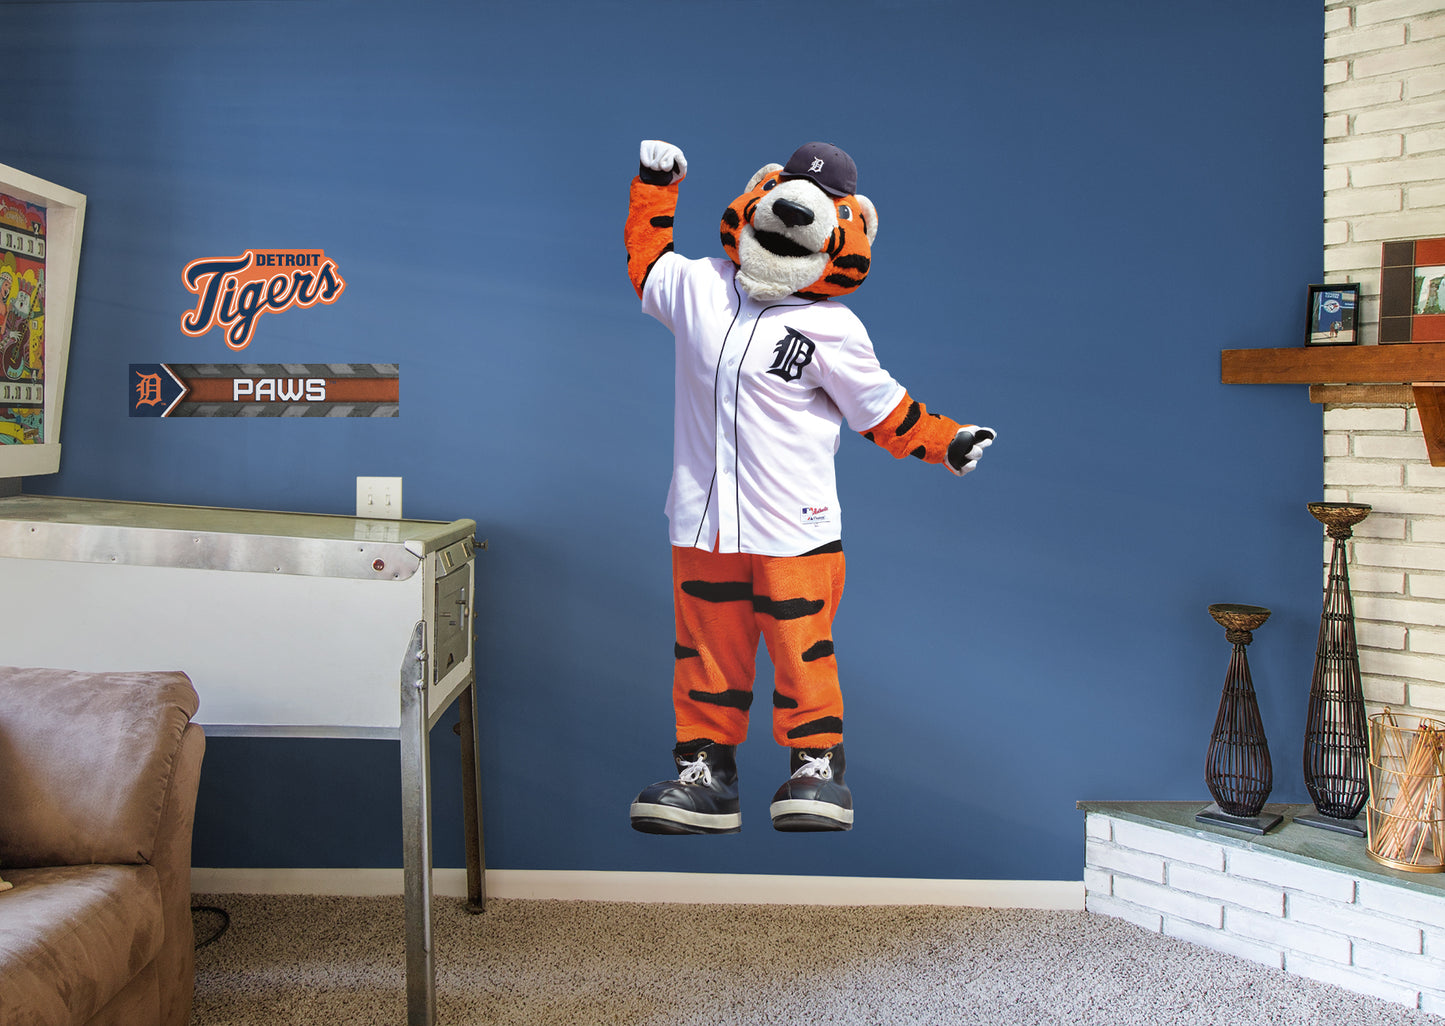 Detroit, Michigan - Paws, the mascot of the Detroit Tigers